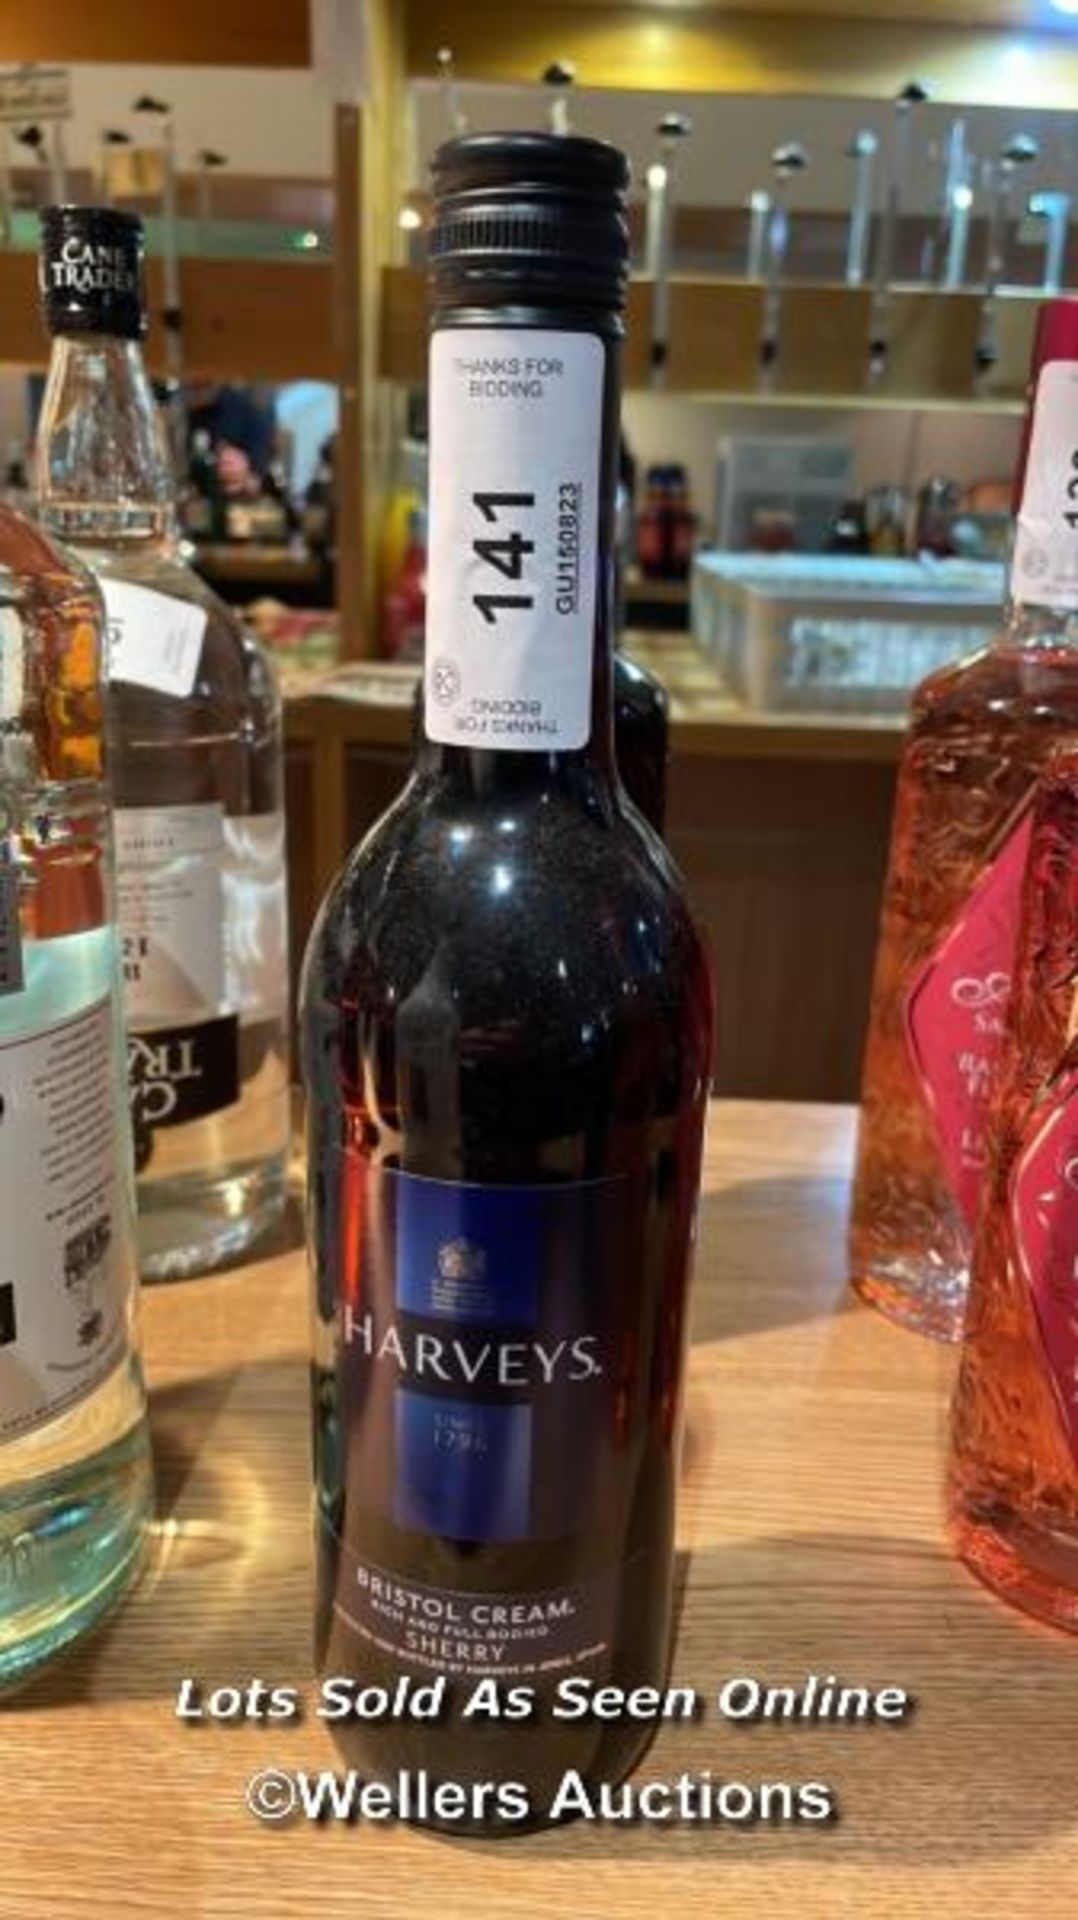 HARVEY'S BRISTOL CREAM SHERRY, 750ML, 17.5% VOL / COLLECTION LOCATION: OLD WOKING DISTRICT